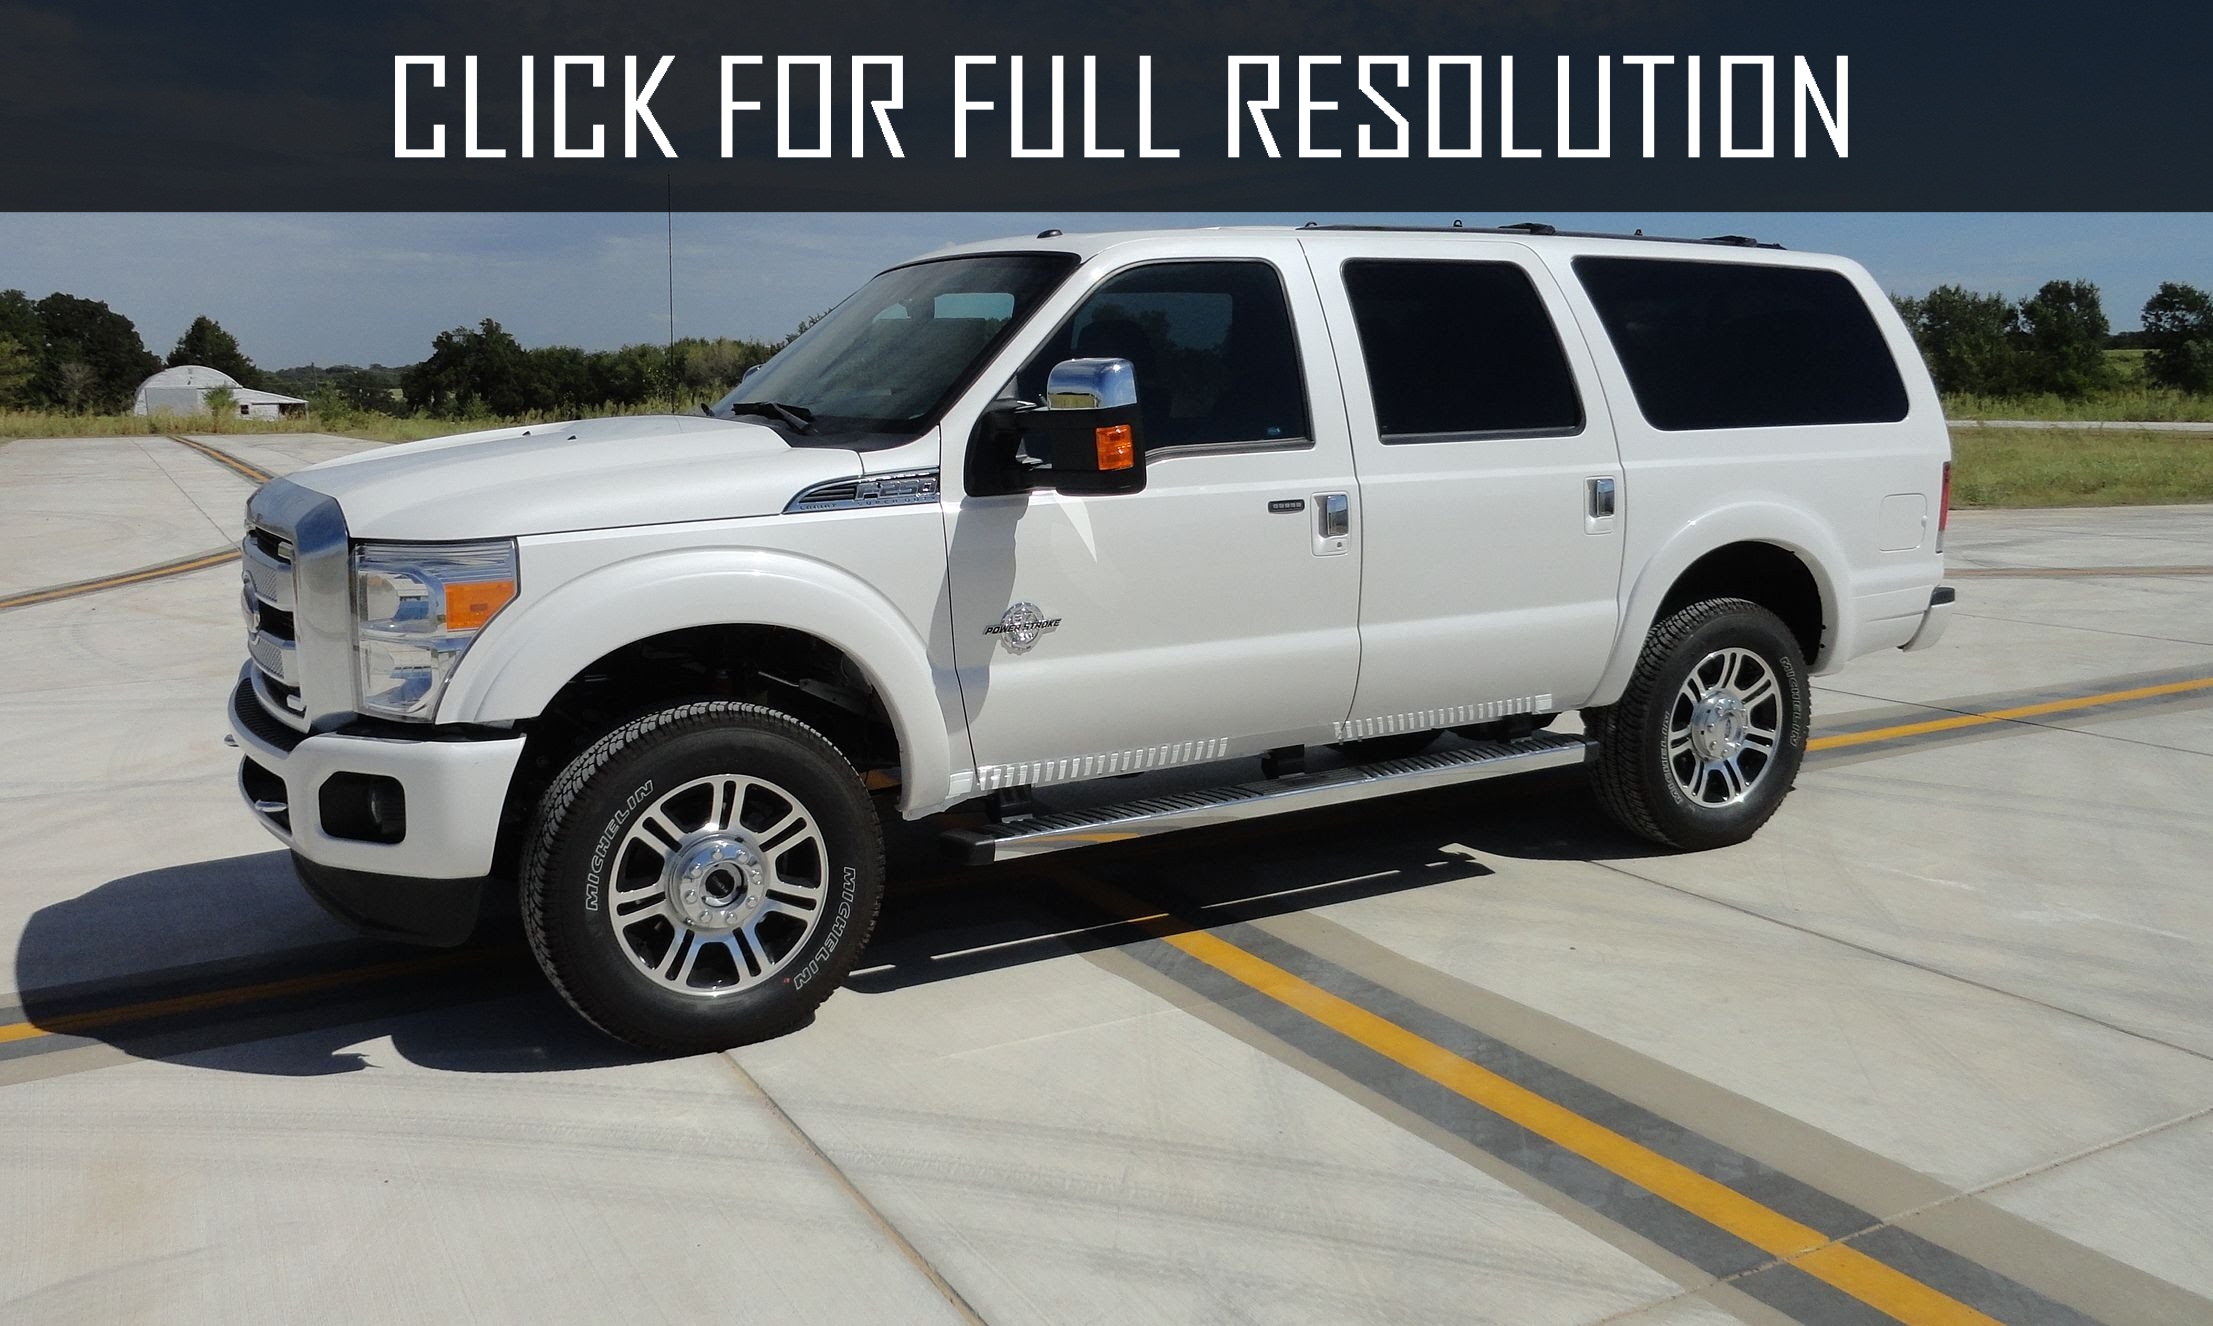 2016 Ford Excursion